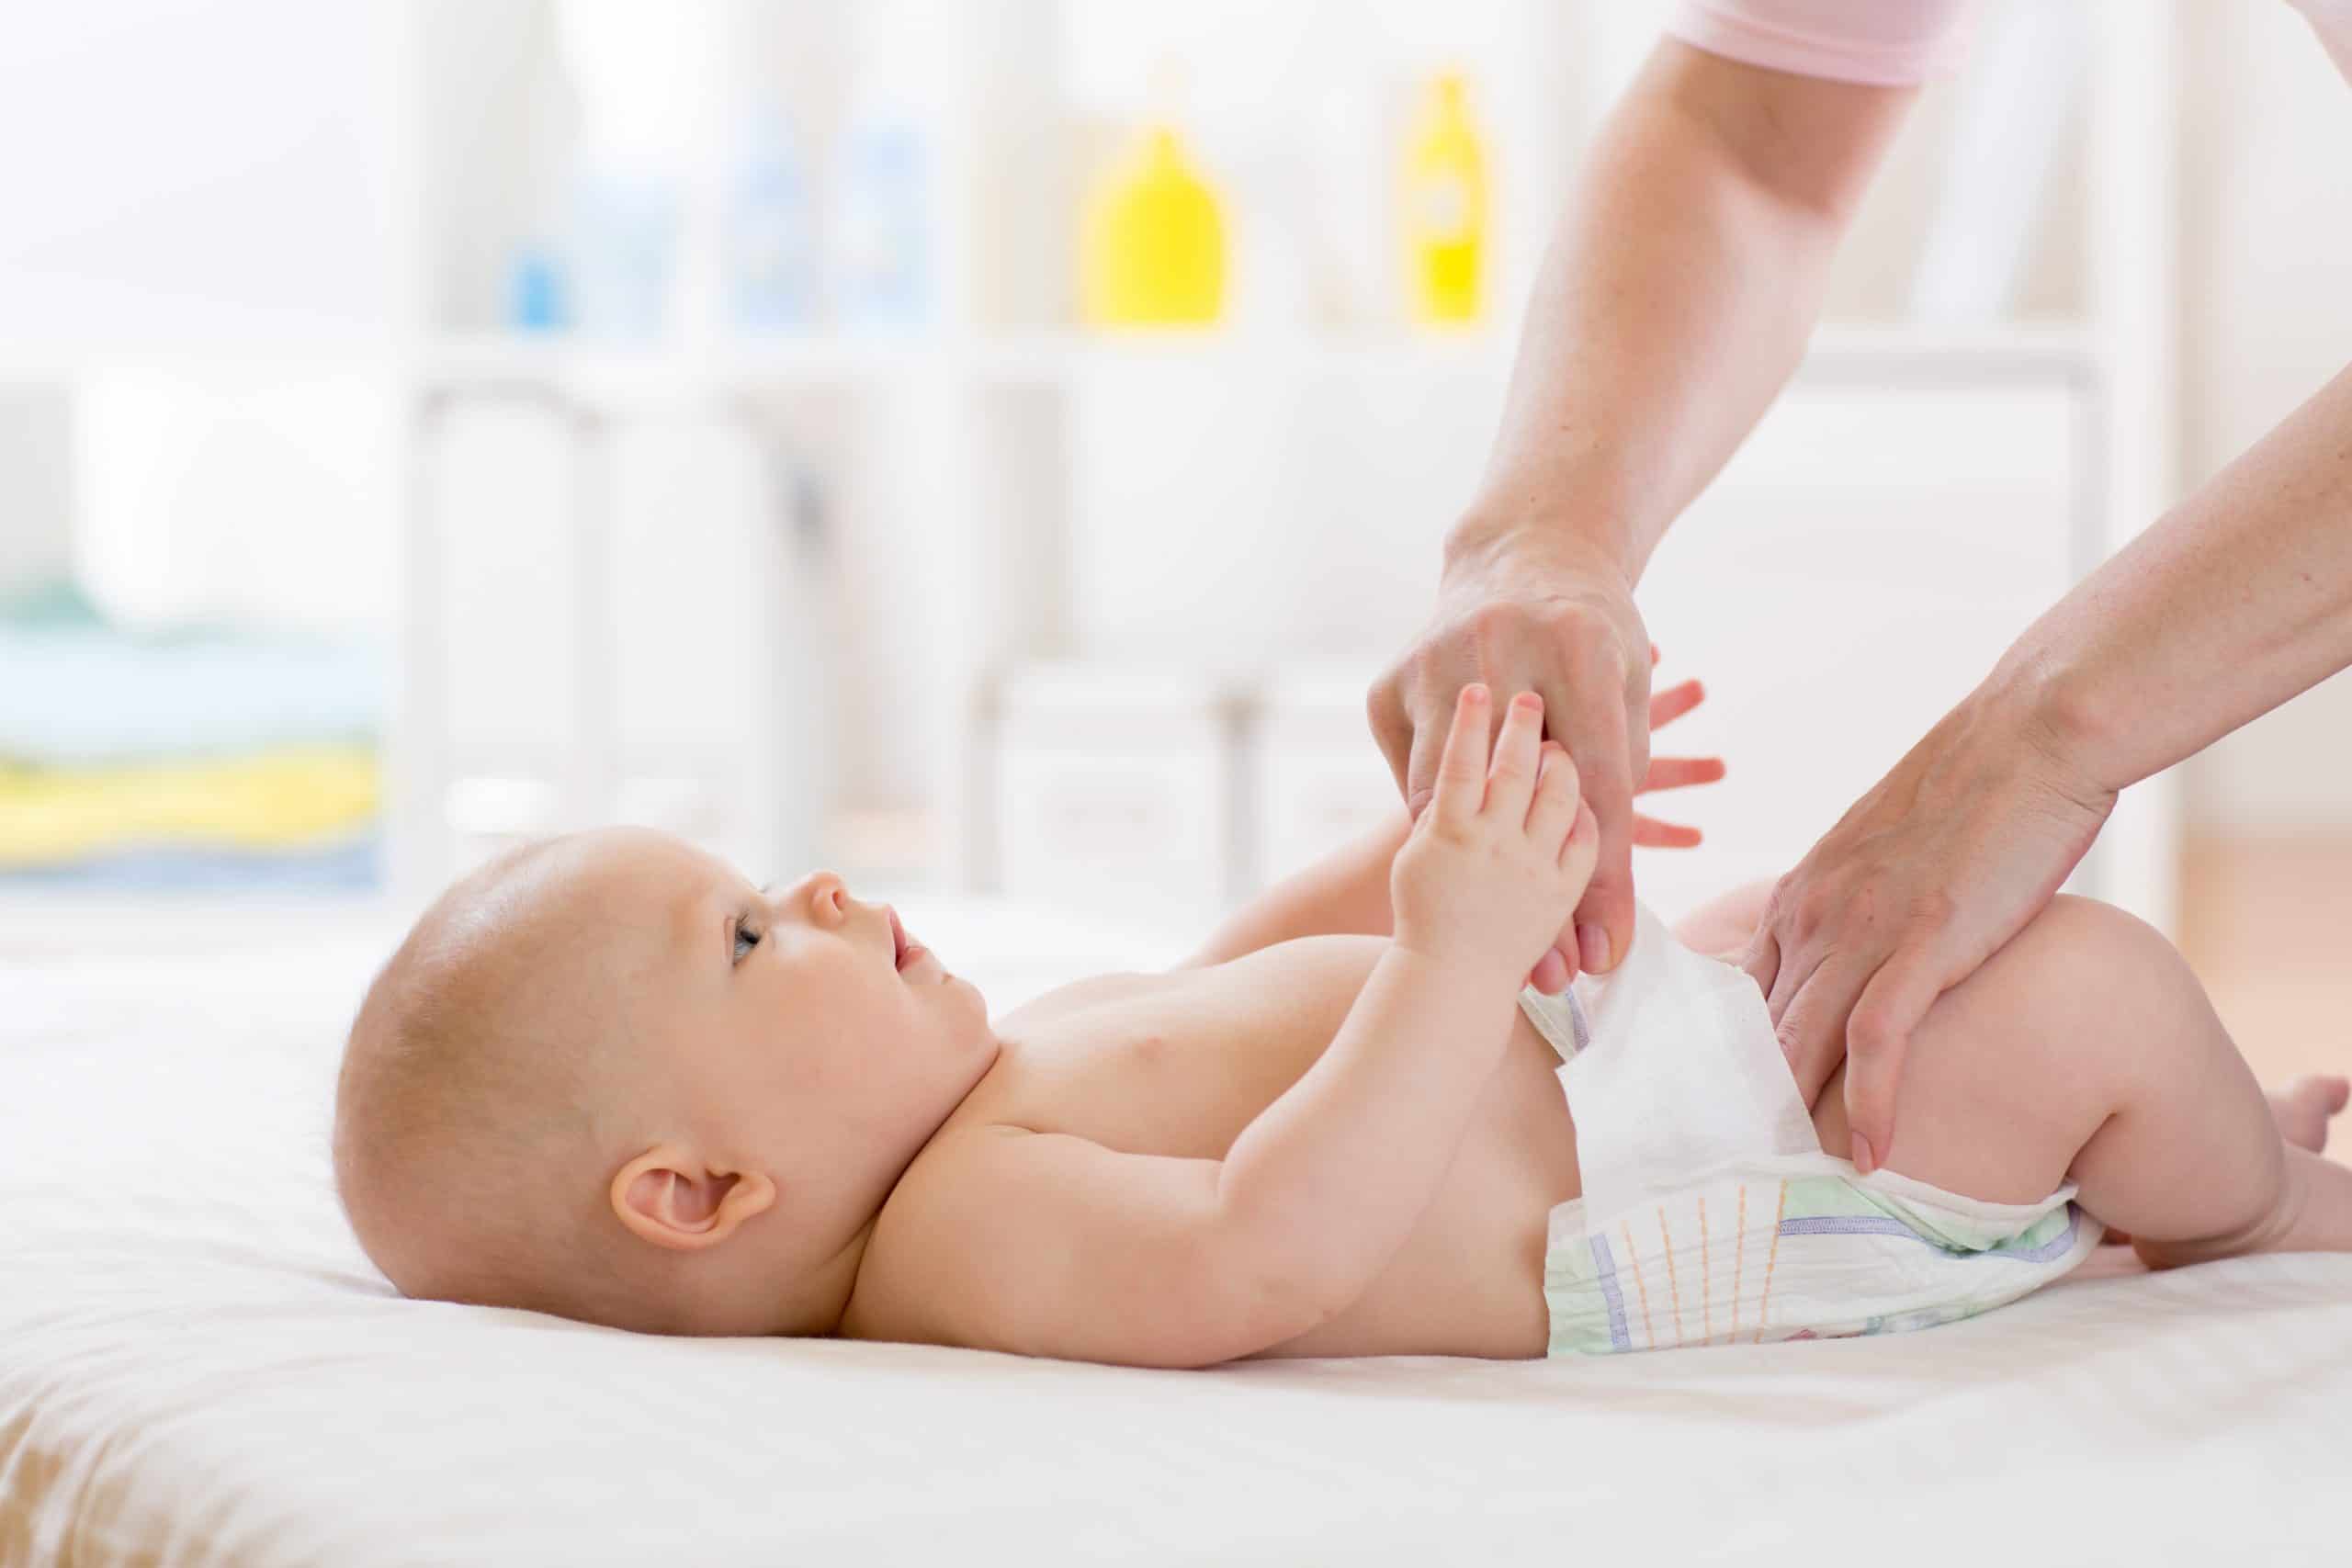 How To Change A Nappy Baby Changing Guide